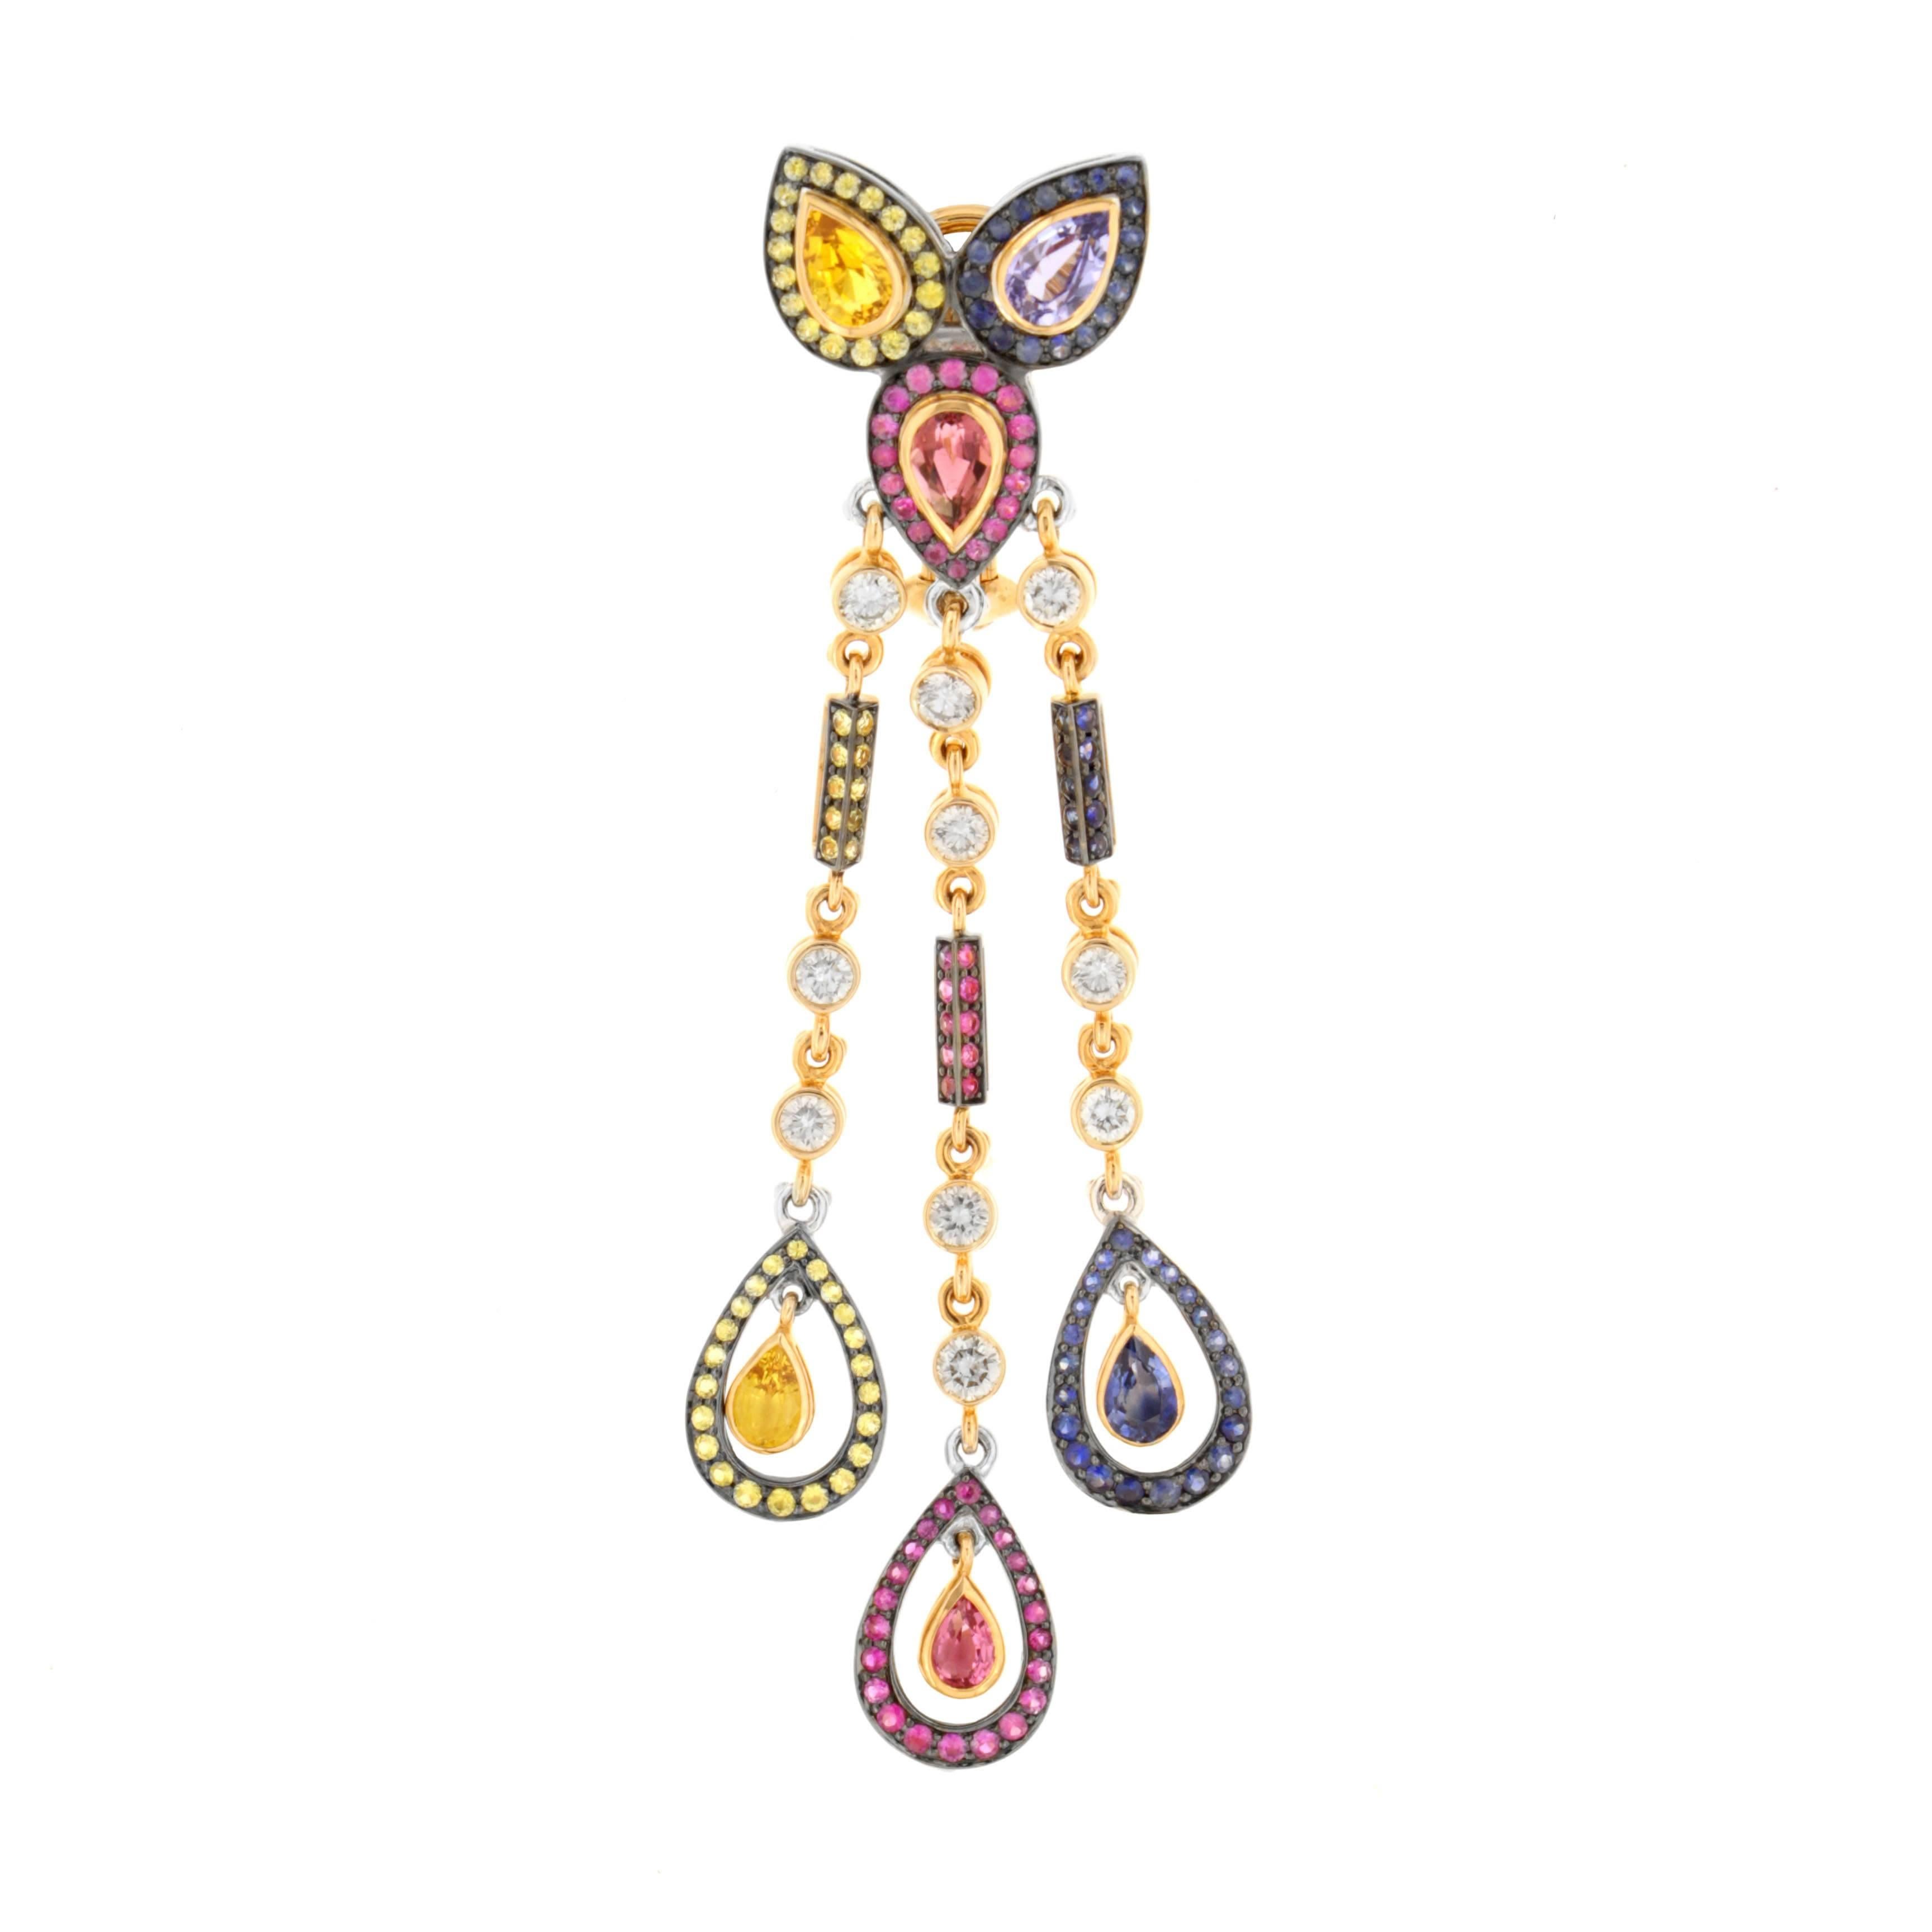 Unleash the mischievous and fantastical from within and have fun wearing Zorab's colorful, whimsical, and stunning pair of dangle earrings featuring 2.21 carats of White Diamonds, 2.17 carats of Blue Sapphire, 1.70 carats of Pink Tourmaline, 1.23